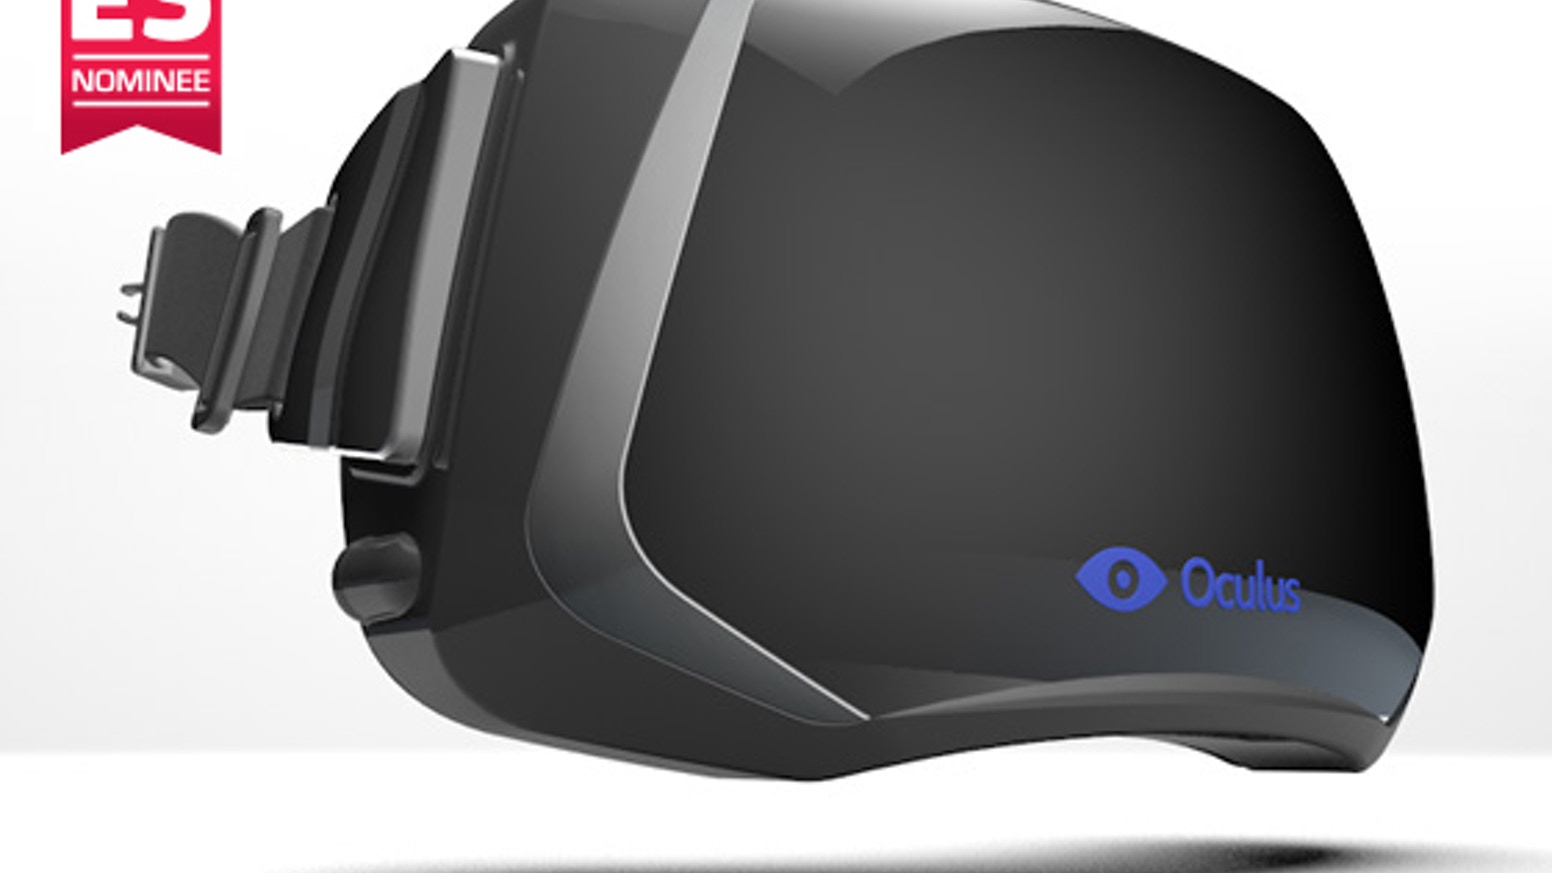 Developer kit for the Oculus Rift - the first truly immersive virtual reality headset for video games.